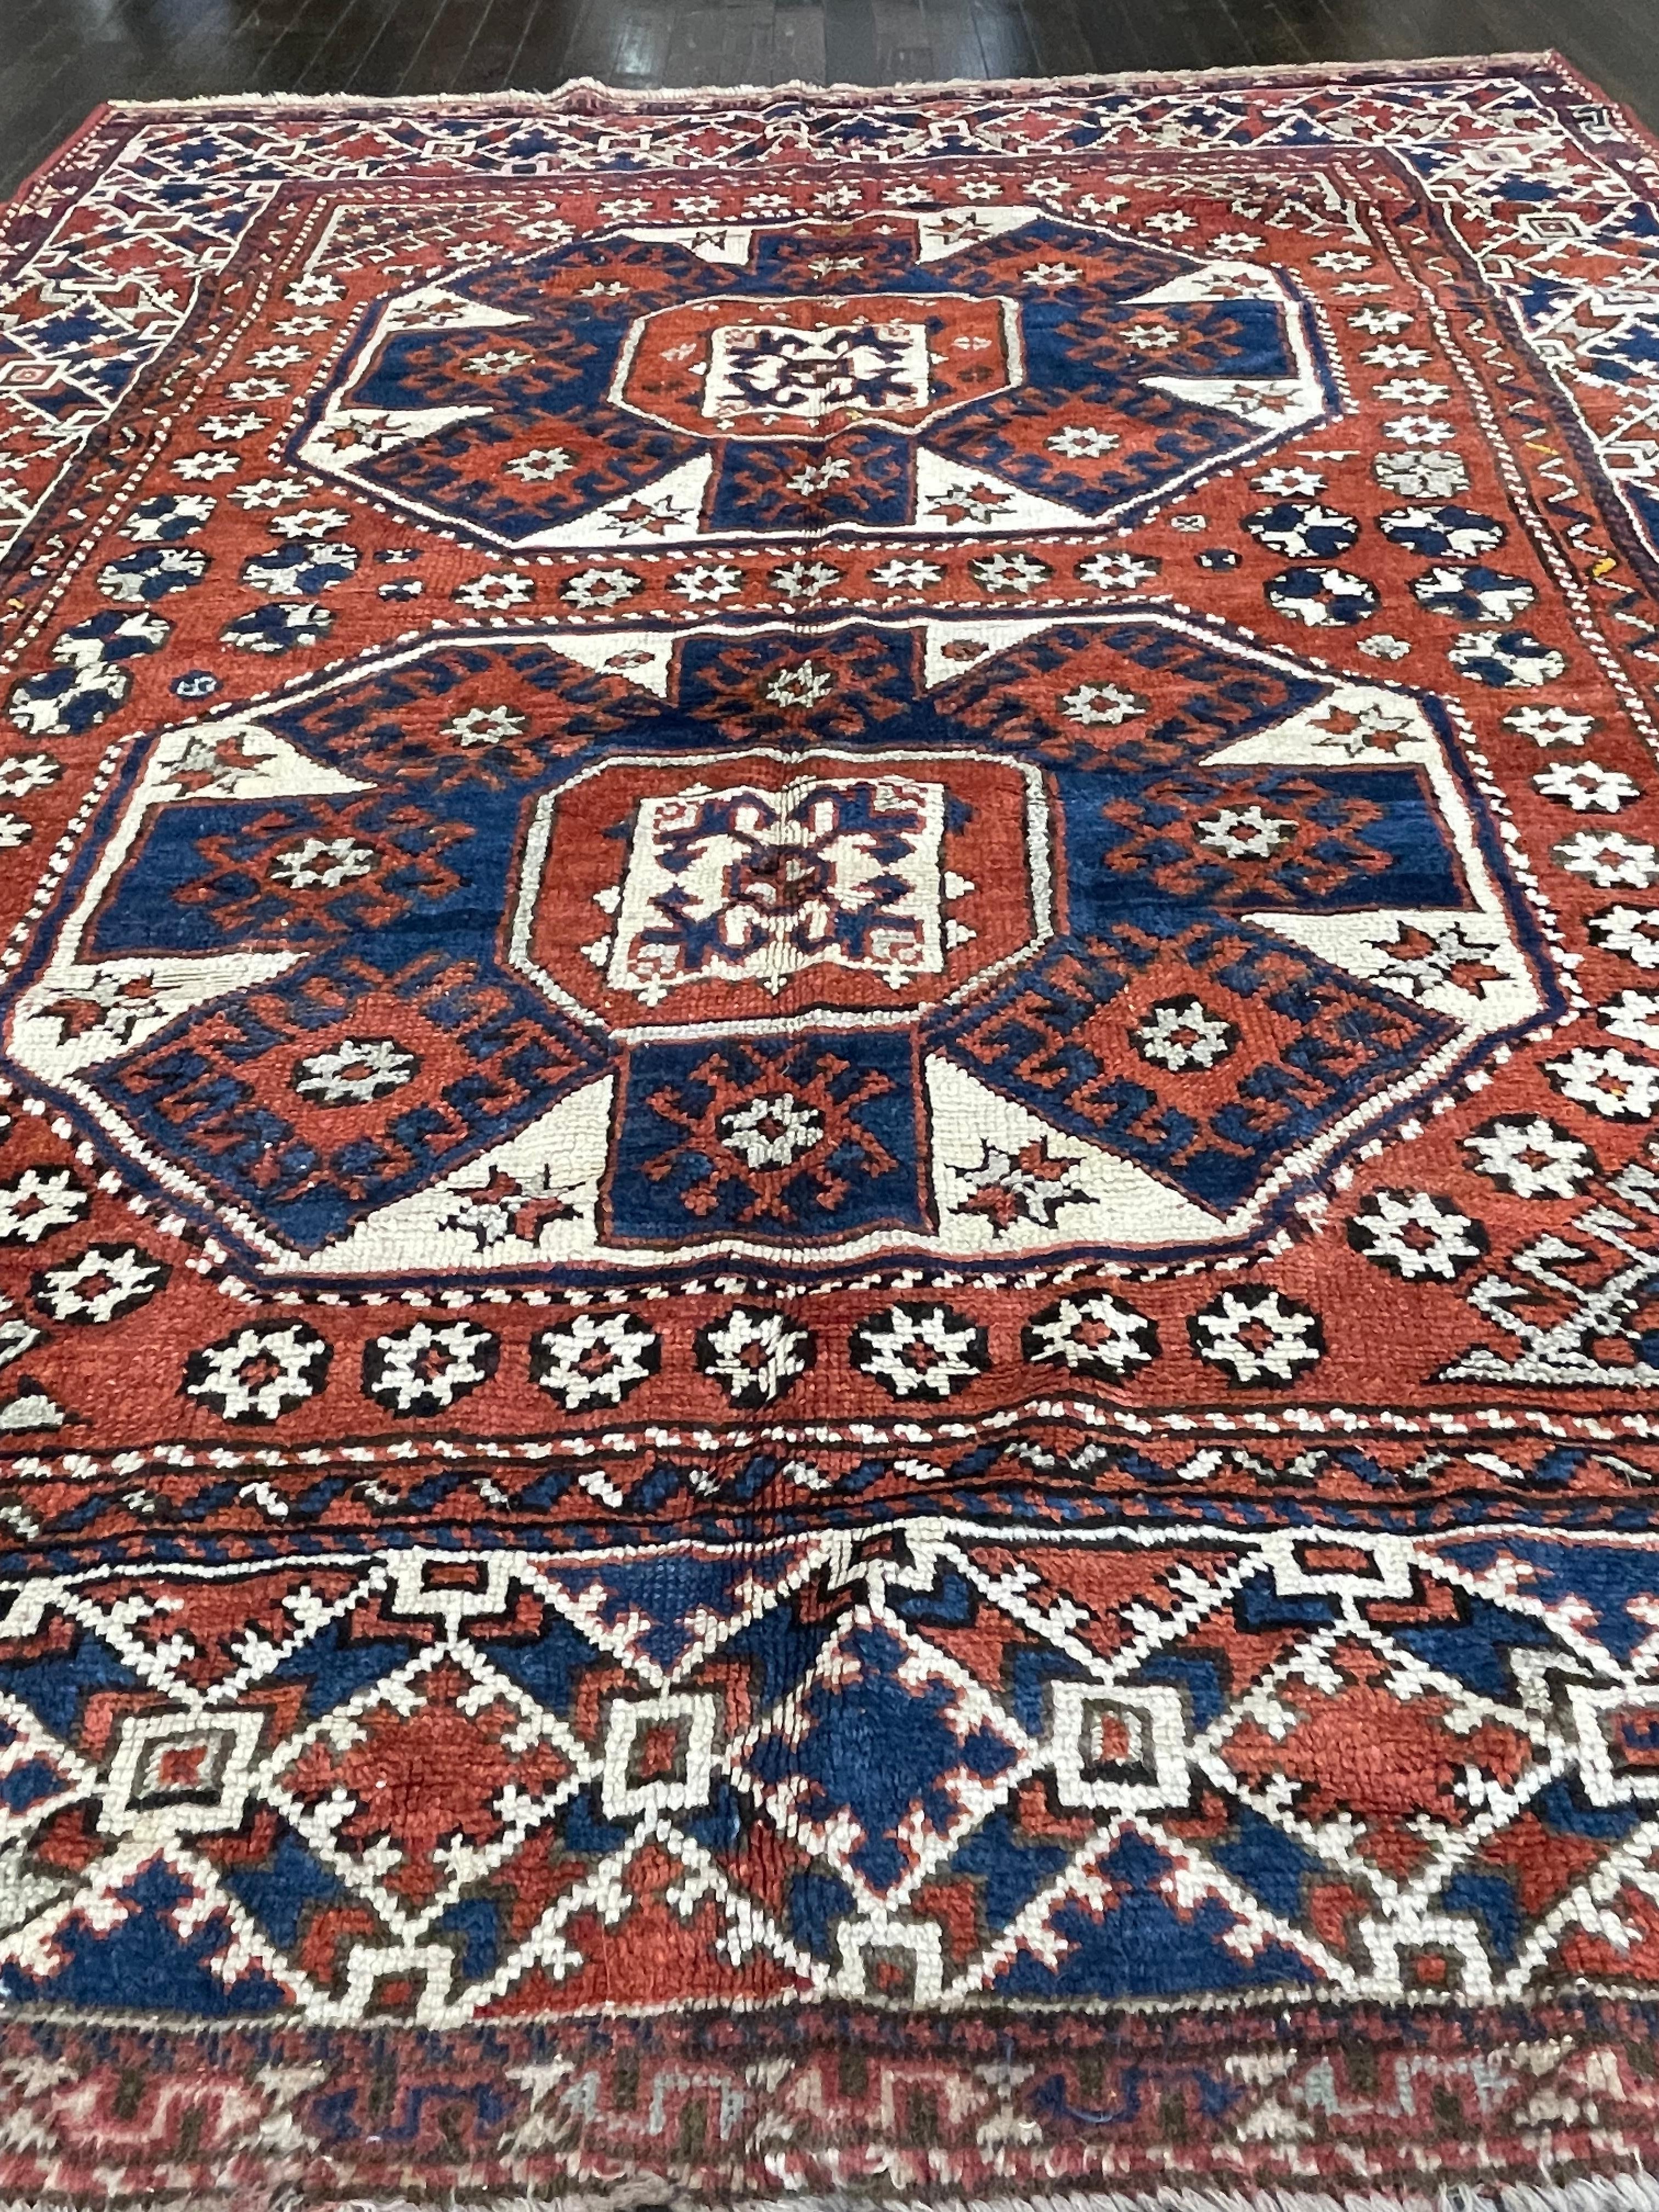 This rug is hand woven in the Caucasus mountains region. With all organic dyes and plush rich wool, this rug was woven for personal use and not to be sold in the market. The rich red and blue colors, geometric design makes this rug a signature art